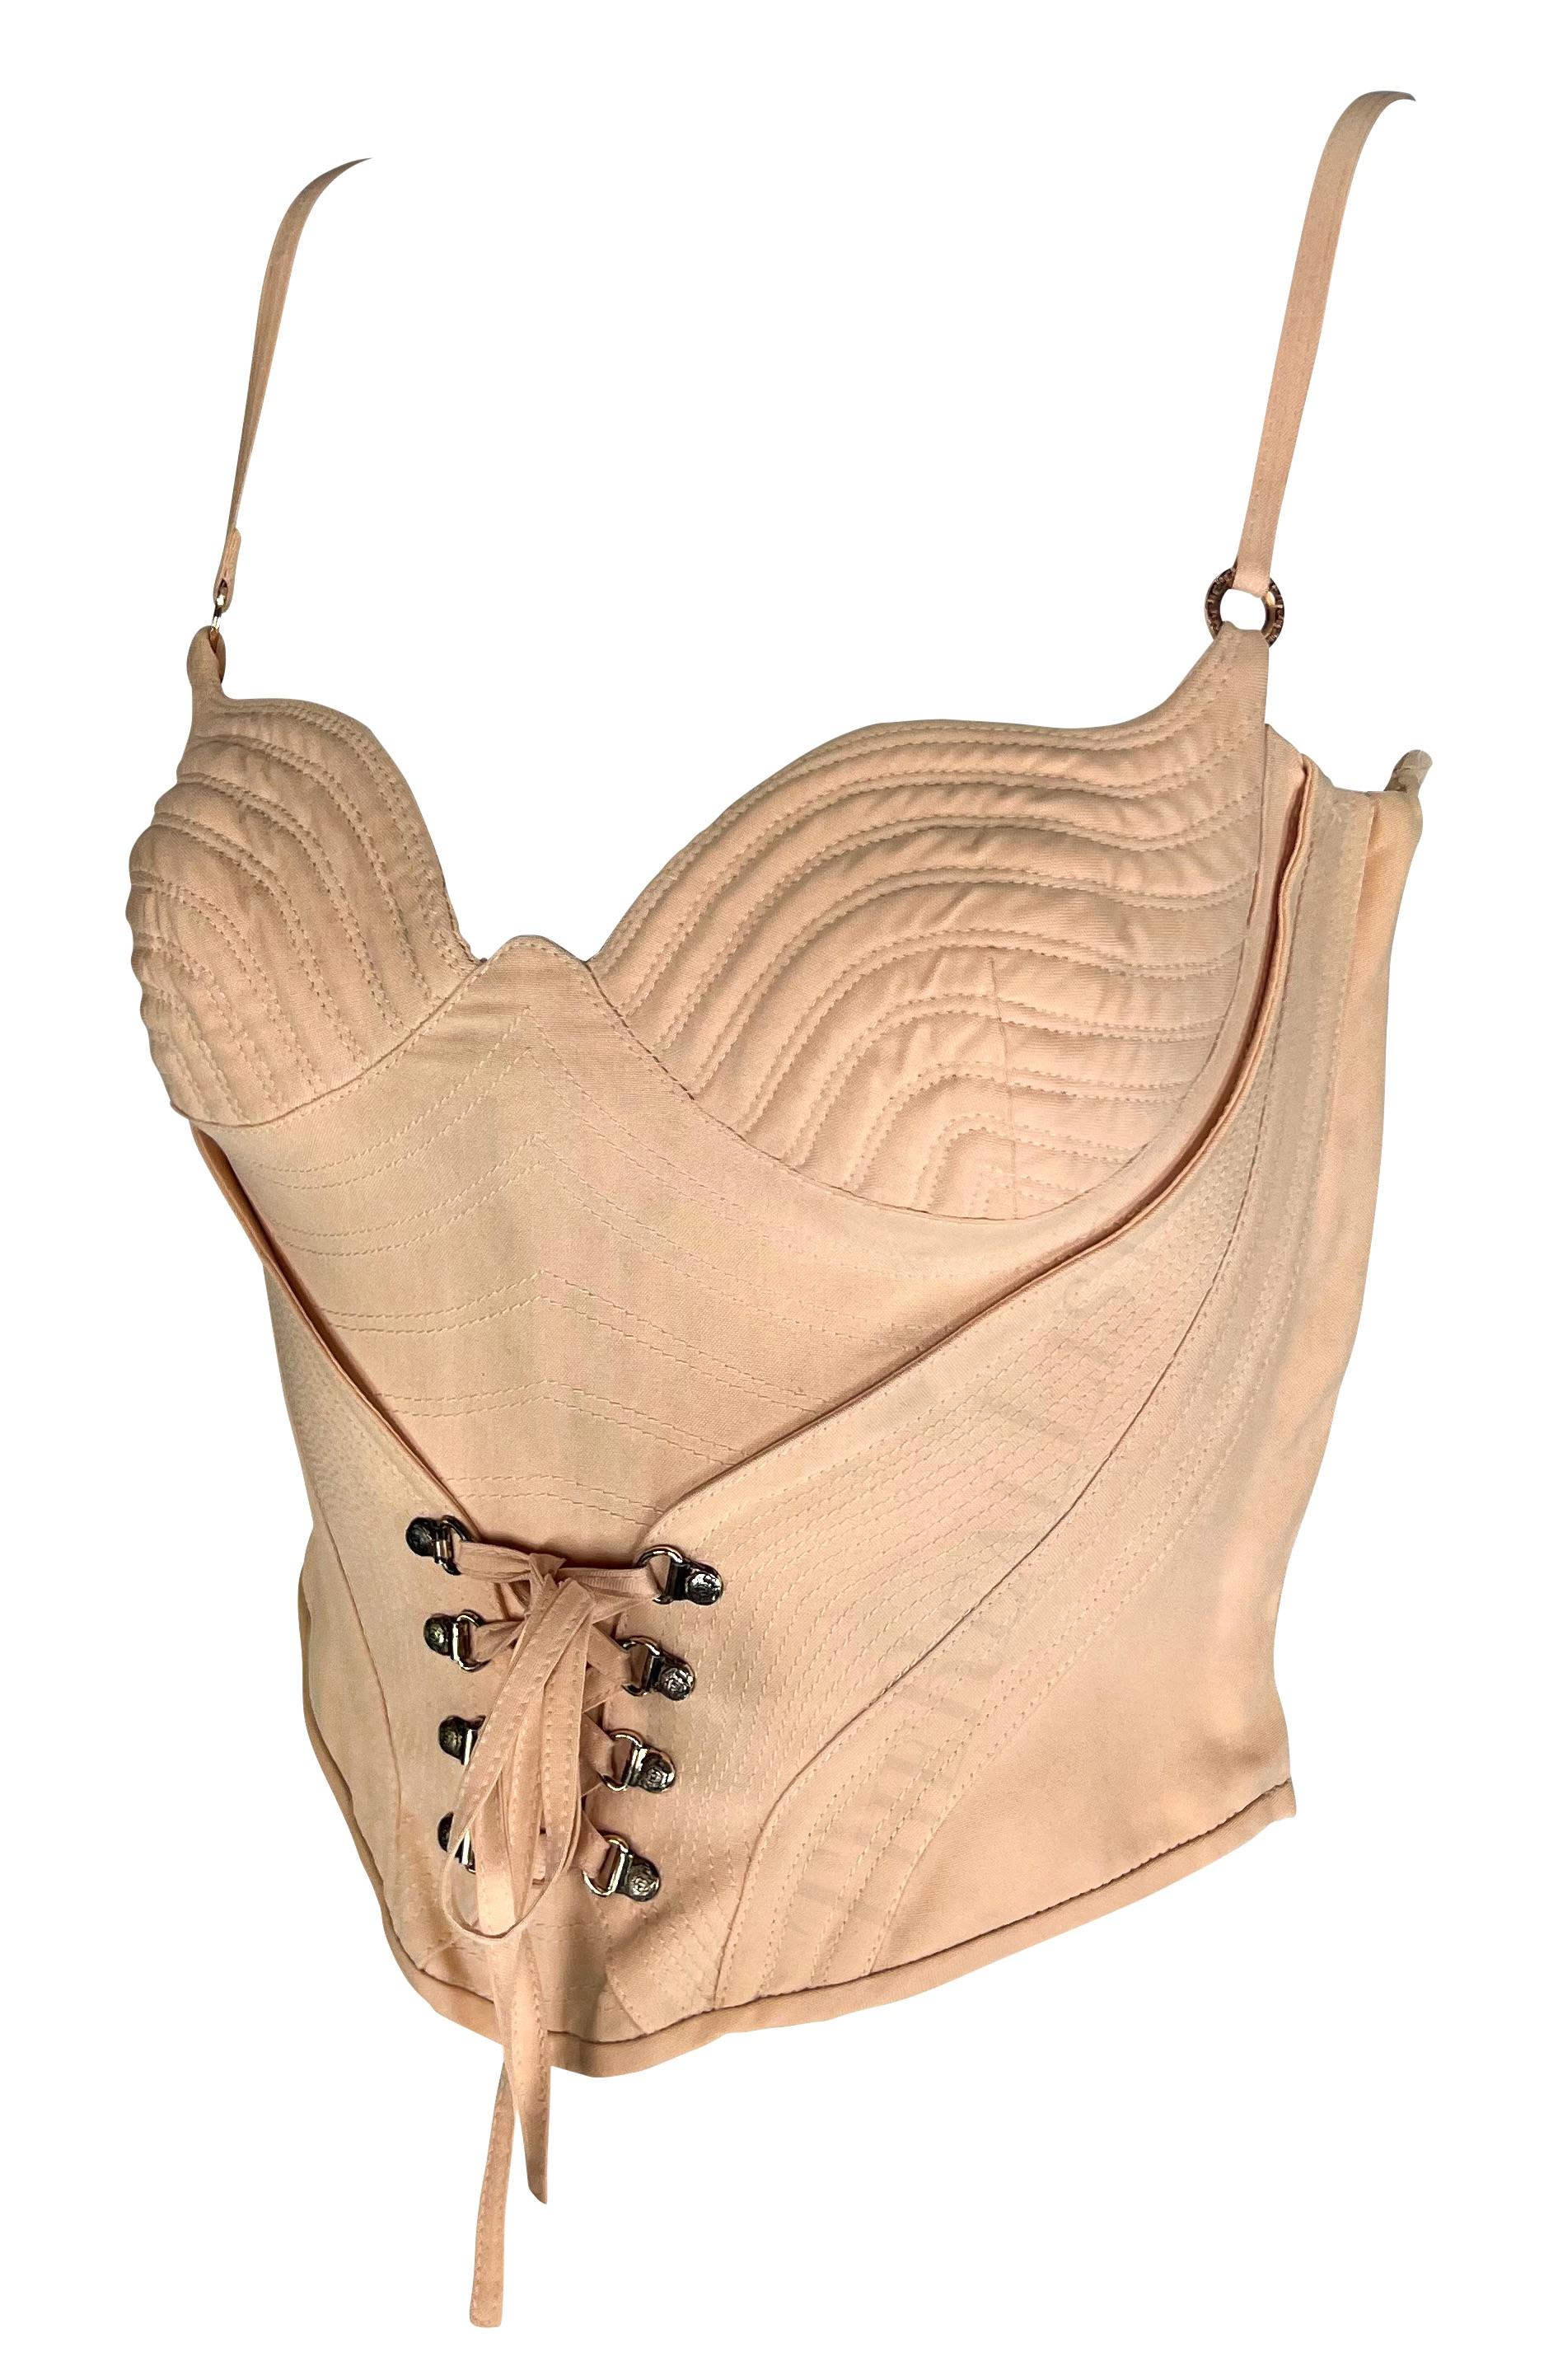 S/S 1995 Gianni Versace Light Pink Boned Runway Corset Bustier In Good Condition For Sale In West Hollywood, CA